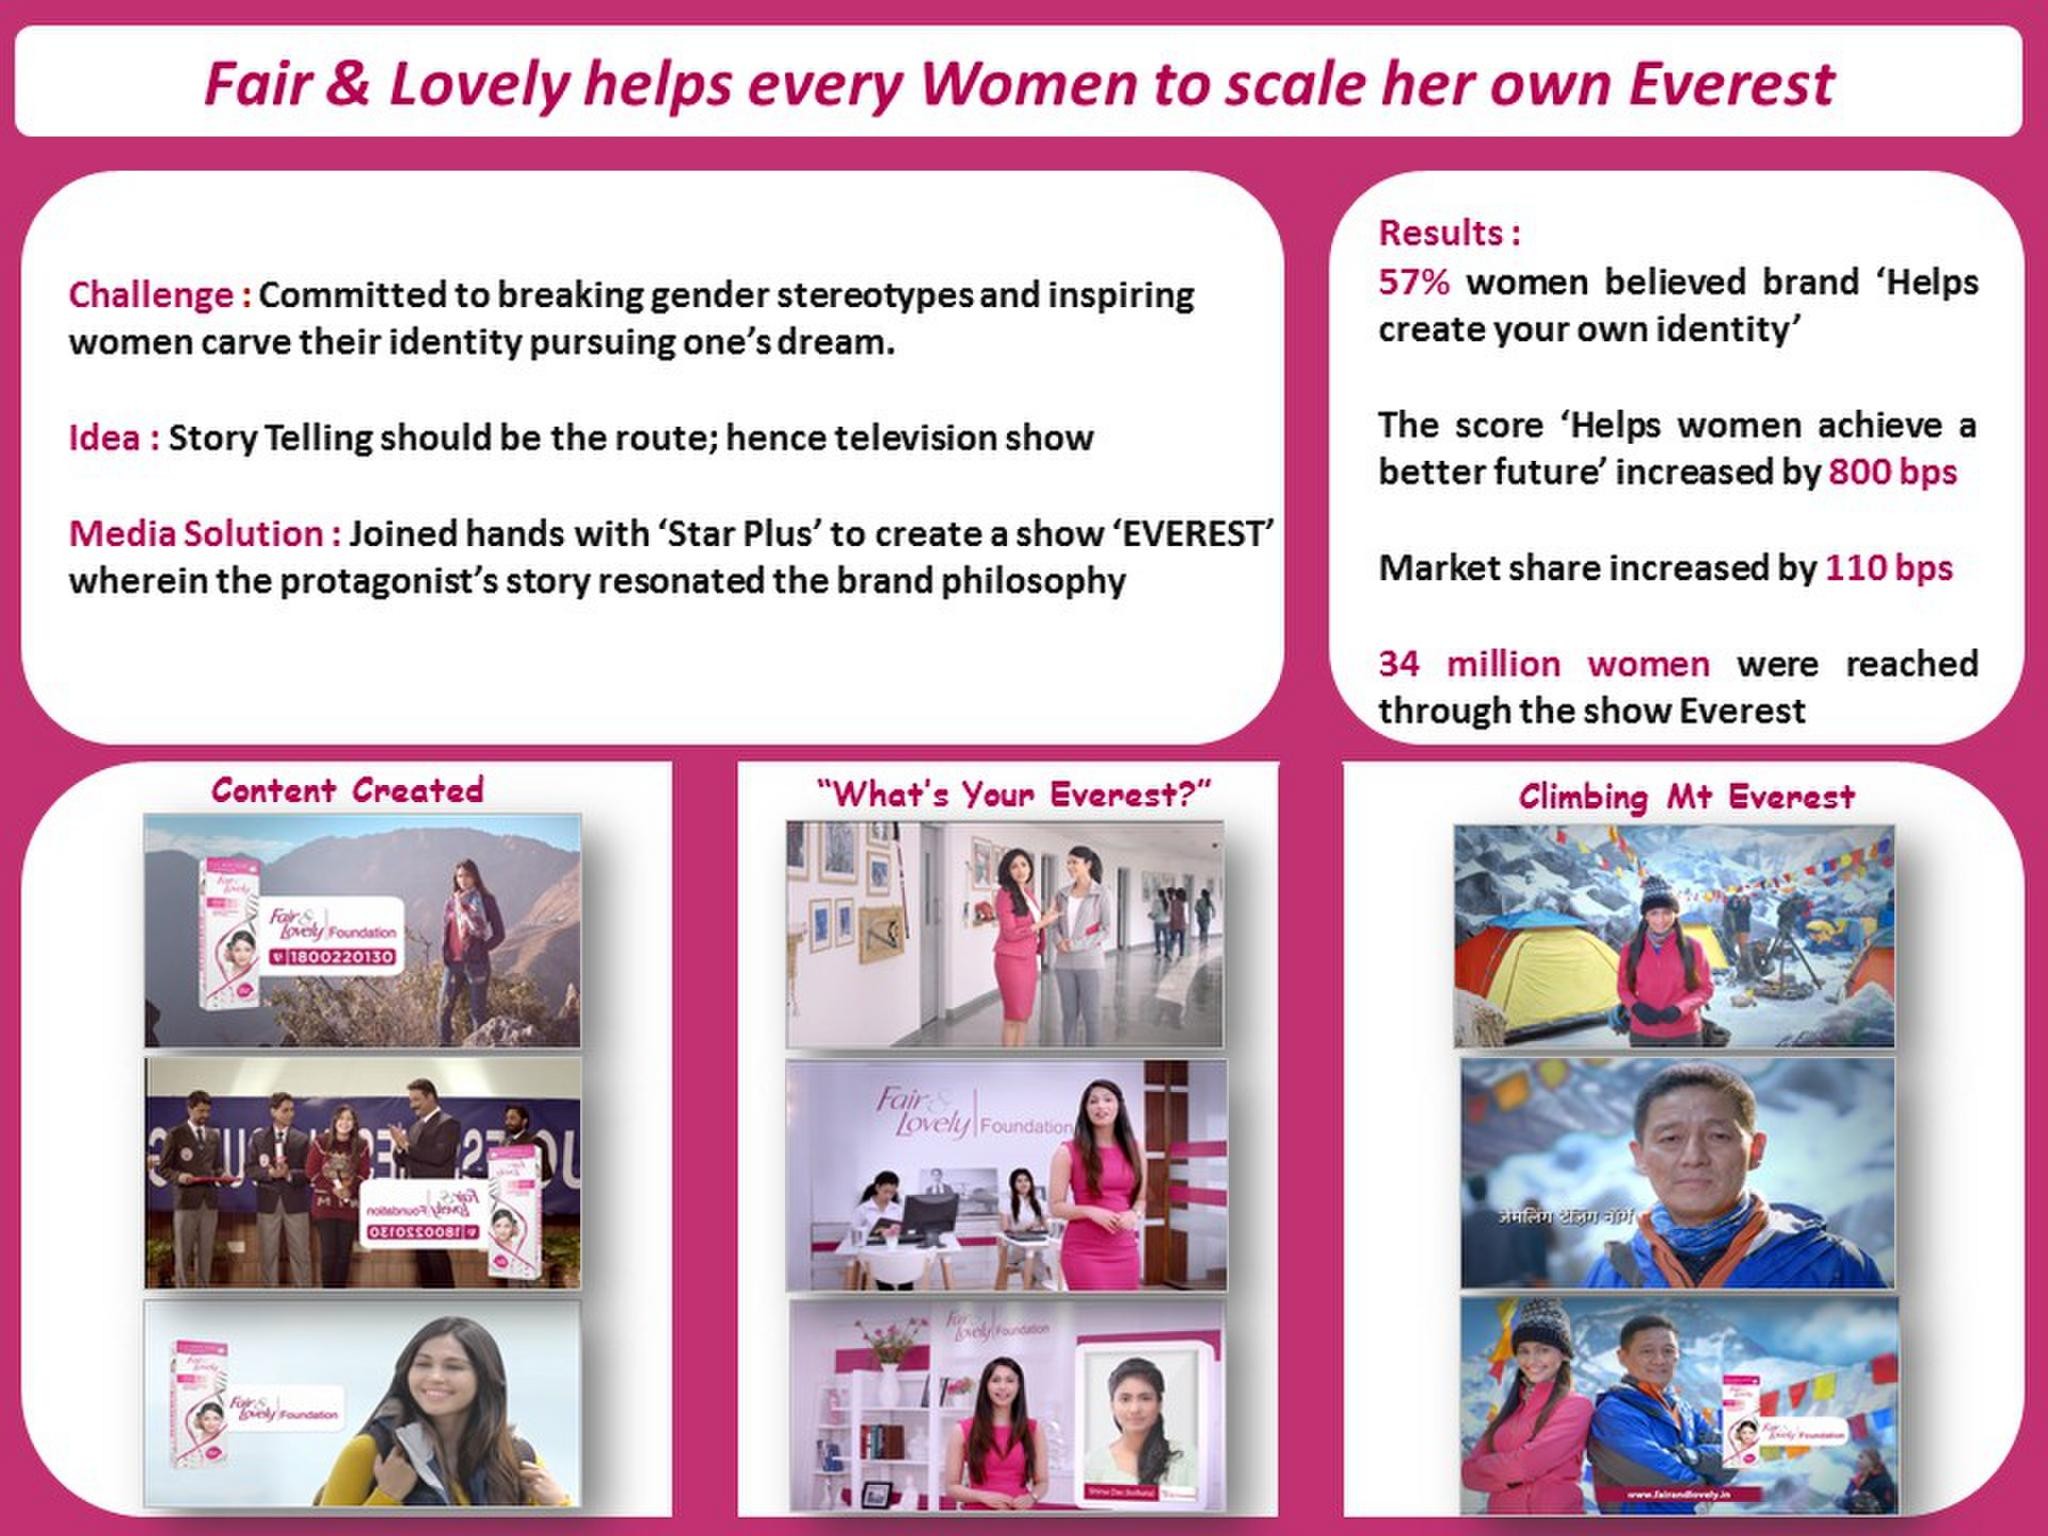 FAIR & LOVELY HELPS EVERY WOMEN TO SCALE HER OWN EVEREST